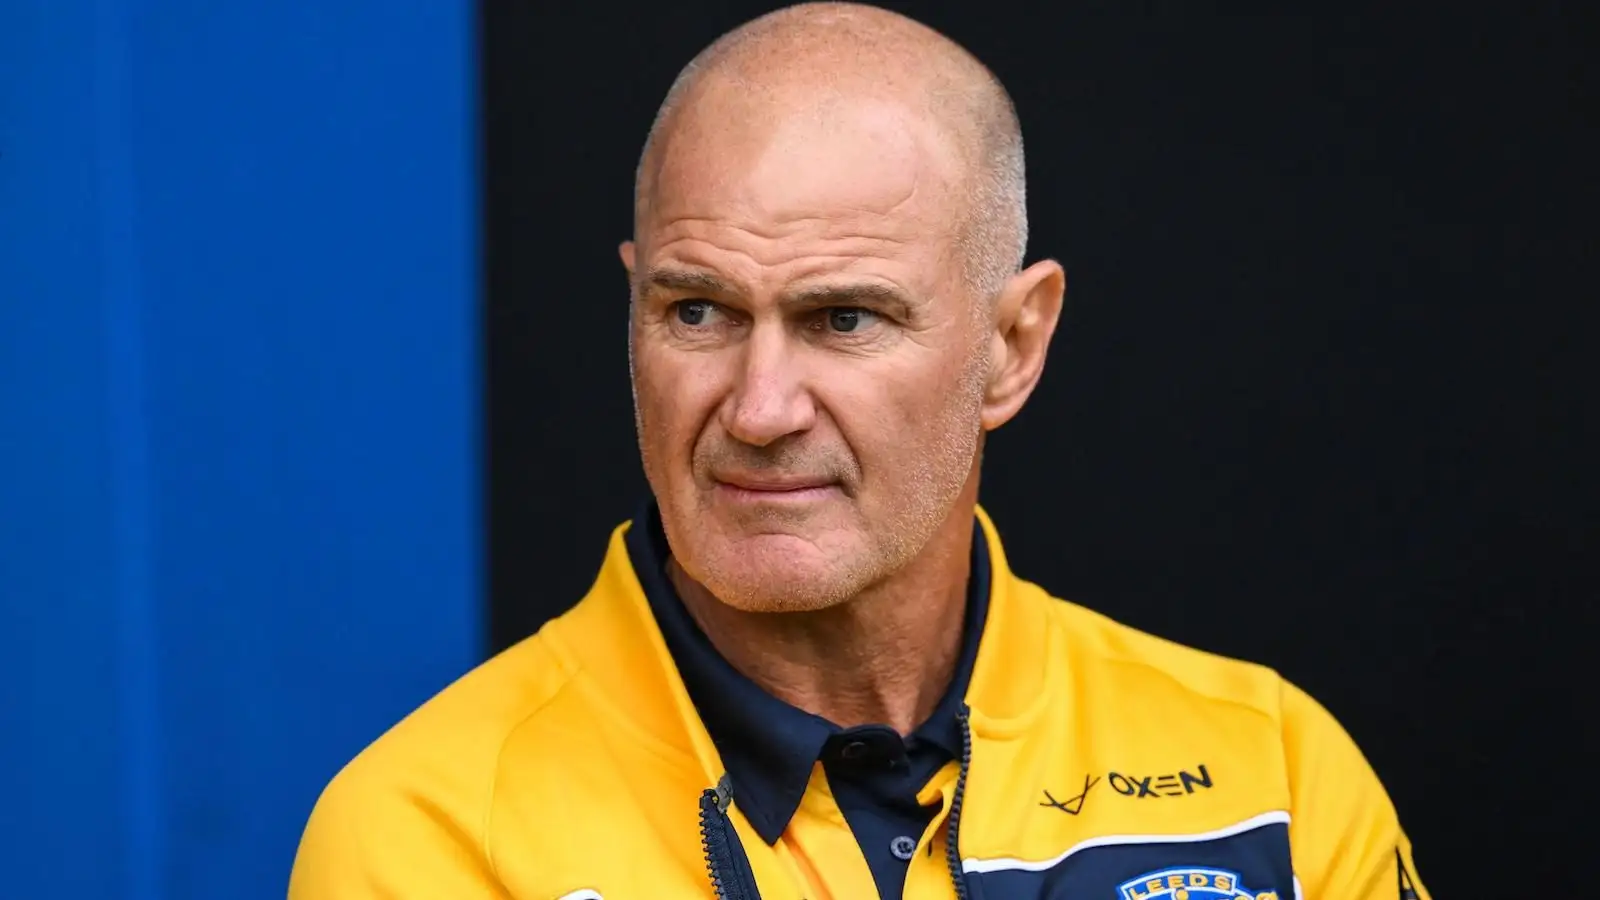 Leeds Rhinos coach Brad Arthur “wanted” by NRL club for surprise role